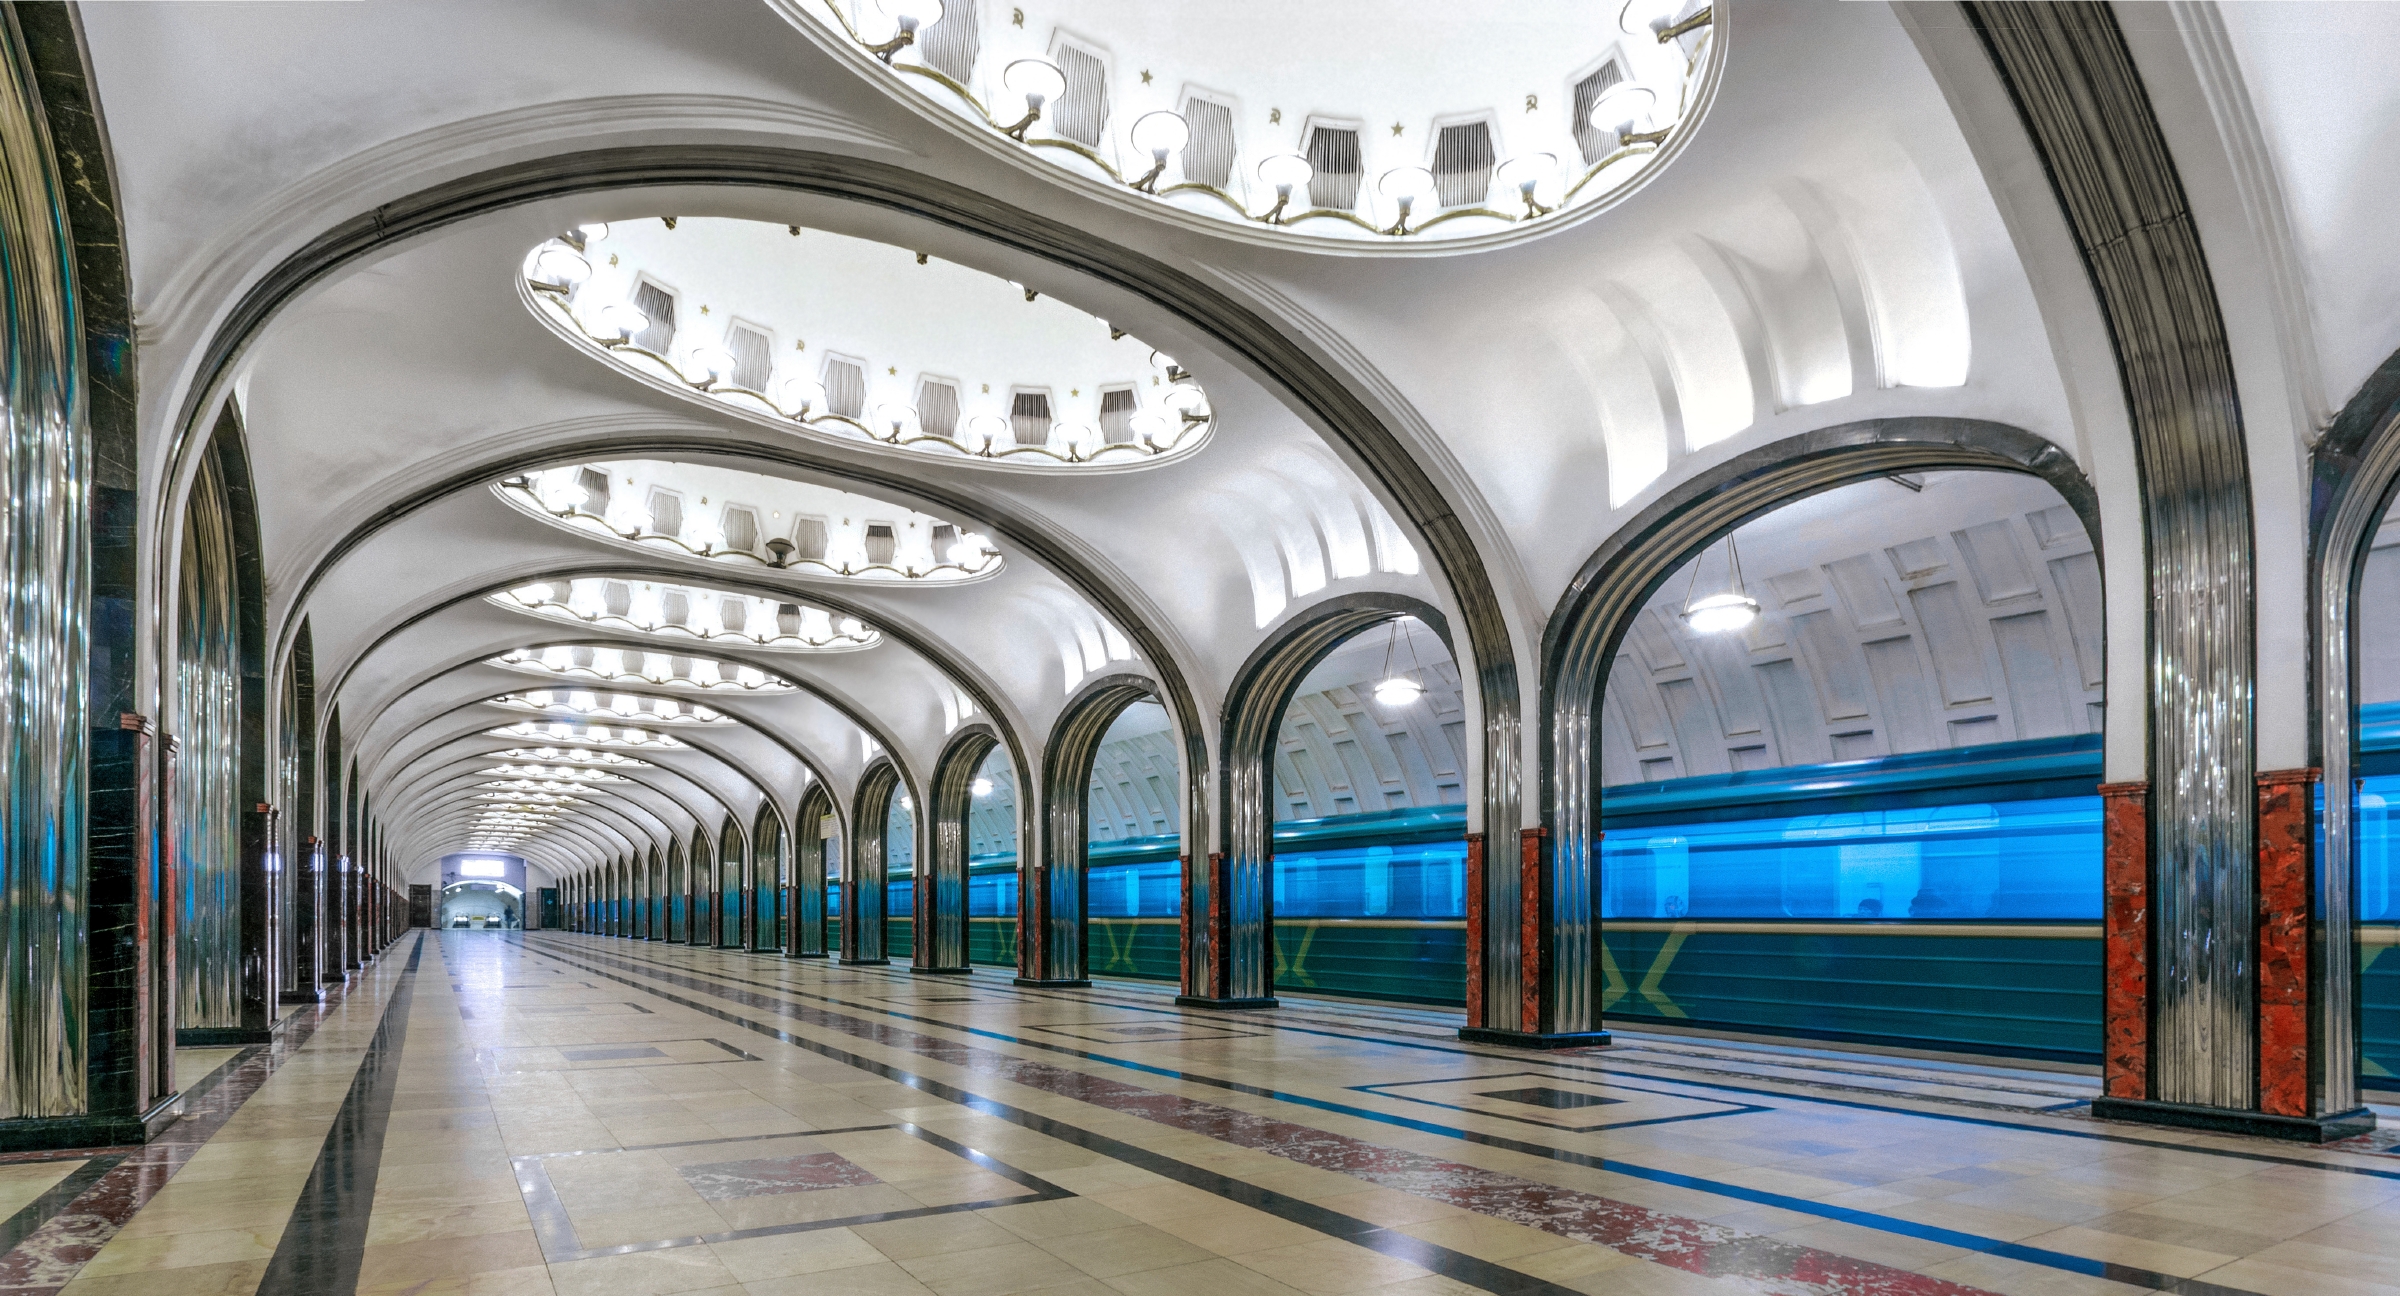 500px Photo ID: 104675197 - Considered to be one of the most beautiful in the system, it is a fine example of pre-World War II Stalinist Architecture and one of the most famous Metro stations in the world. The name as well as the design is a reference to F